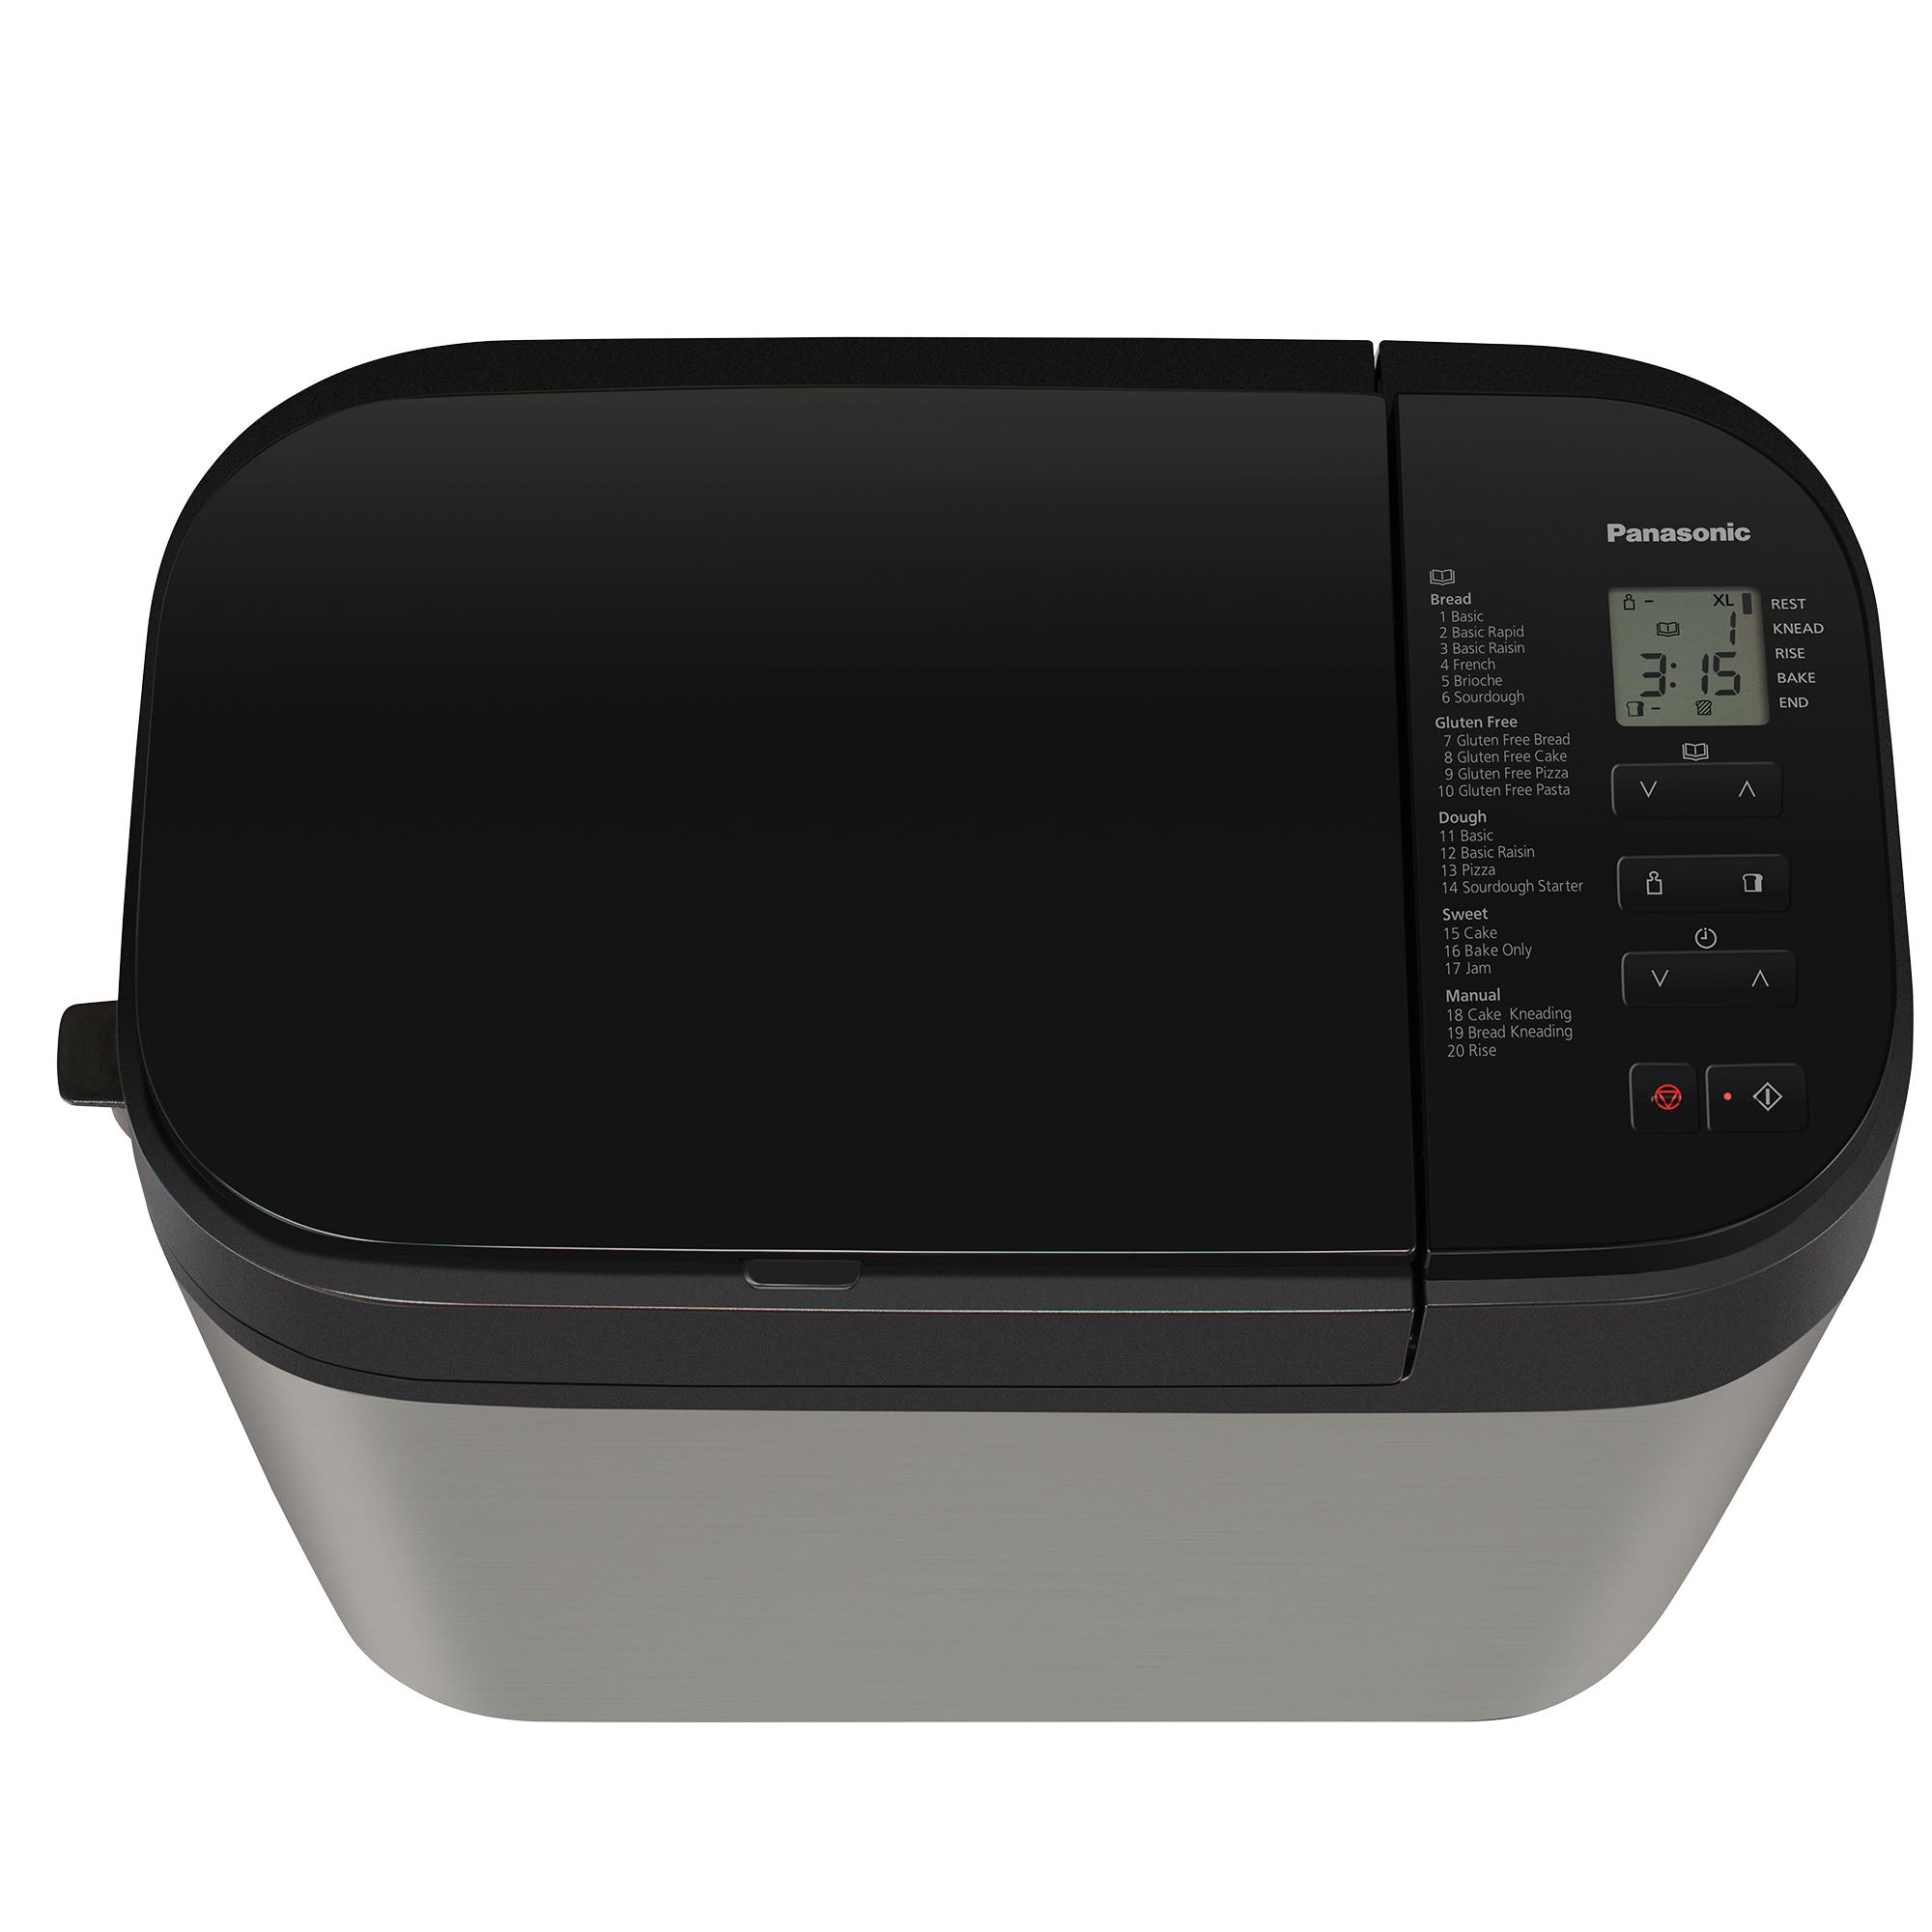 - Panasonic Presets SD-R2550 20 Automatic Bread Maker Artisan-style with